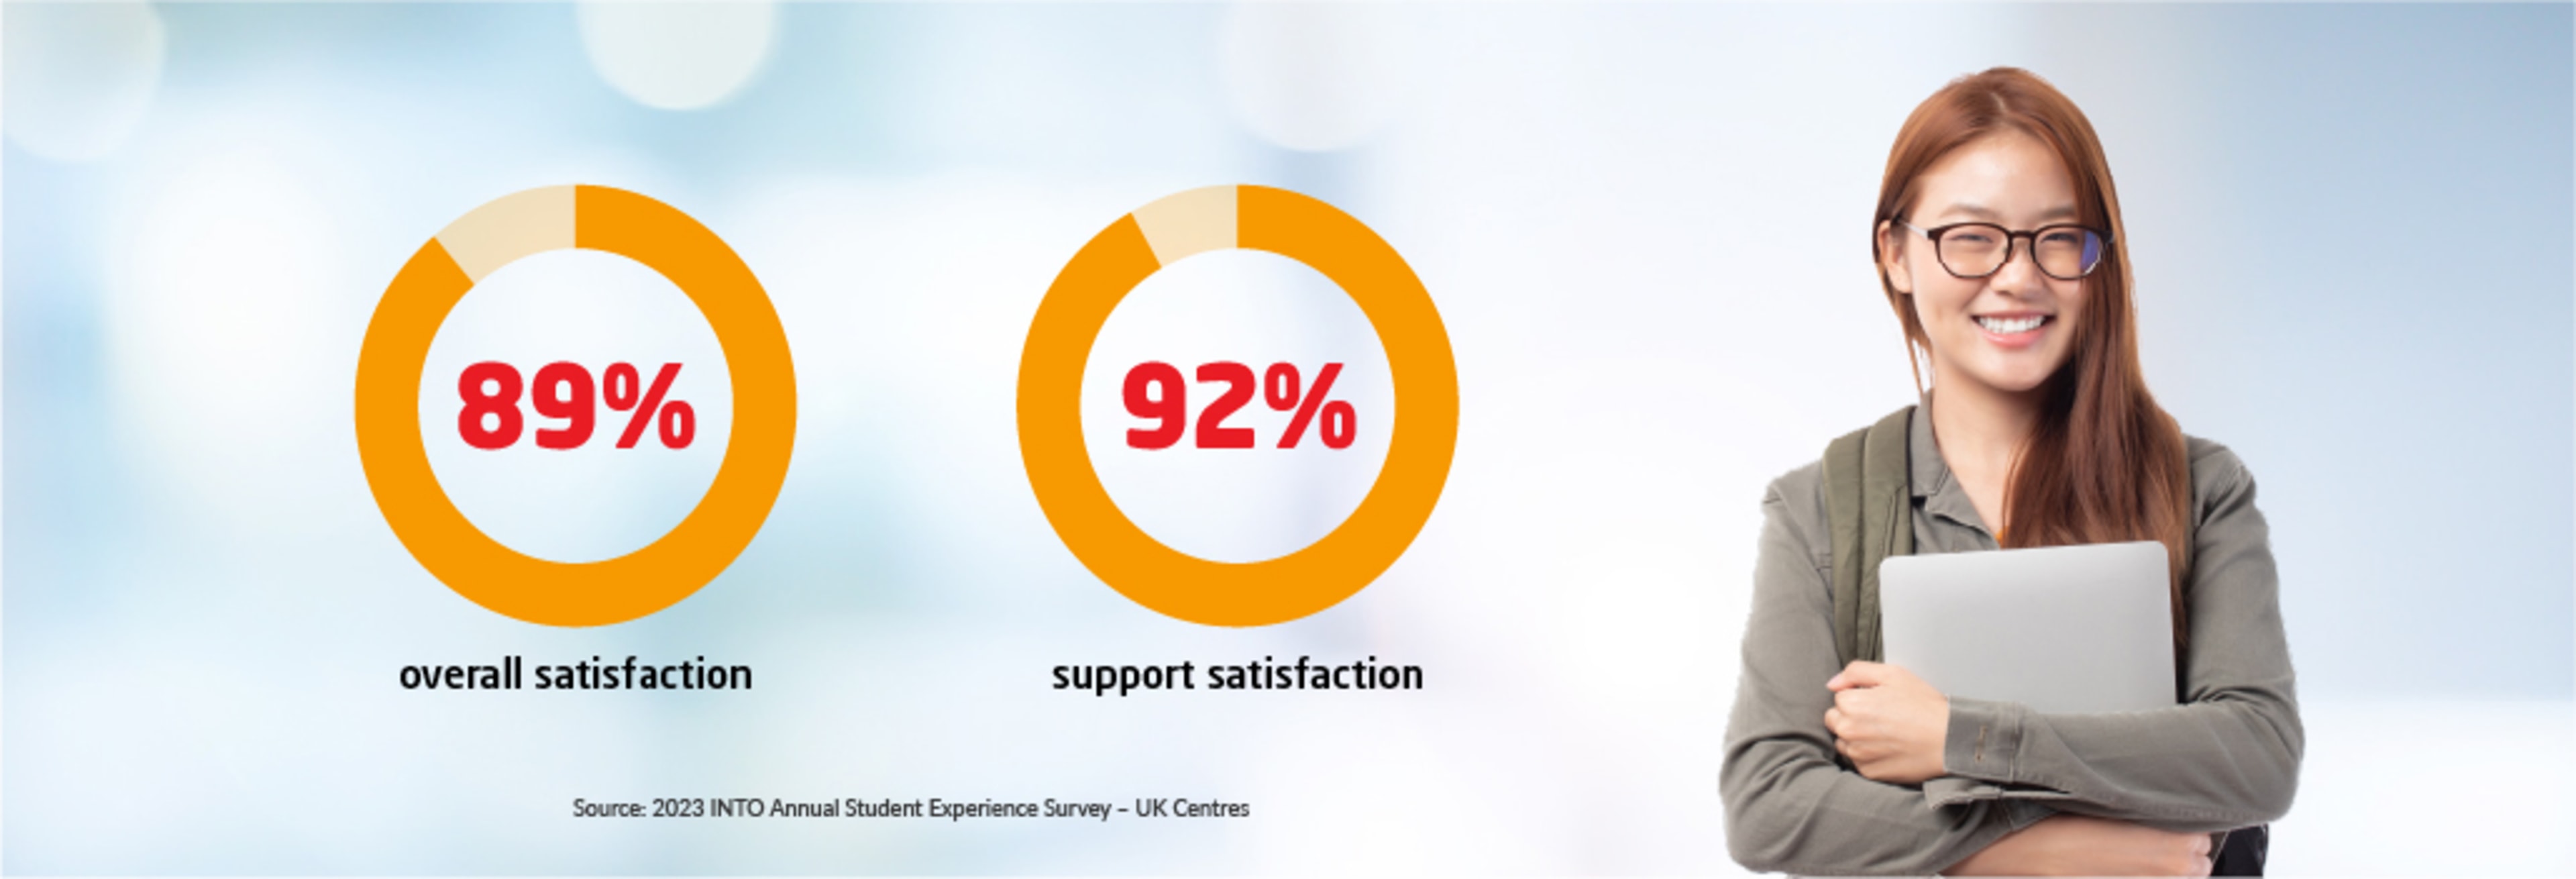 89% overall satisfaction | 92% support satisfaction